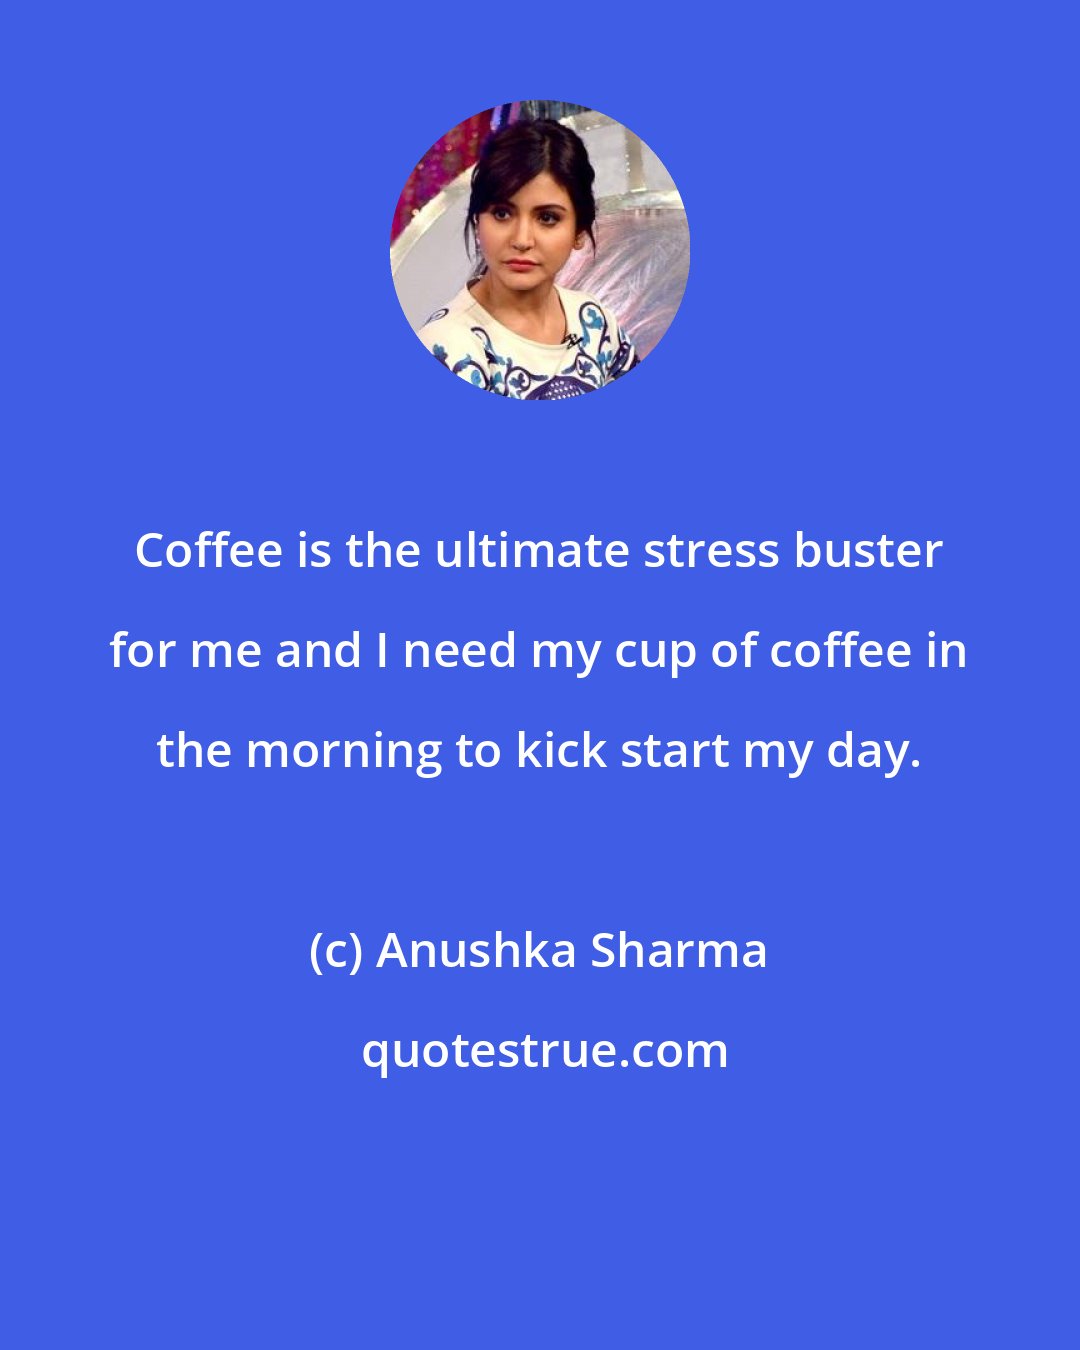 Anushka Sharma: Coffee is the ultimate stress buster for me and I need my cup of coffee in the morning to kick start my day.